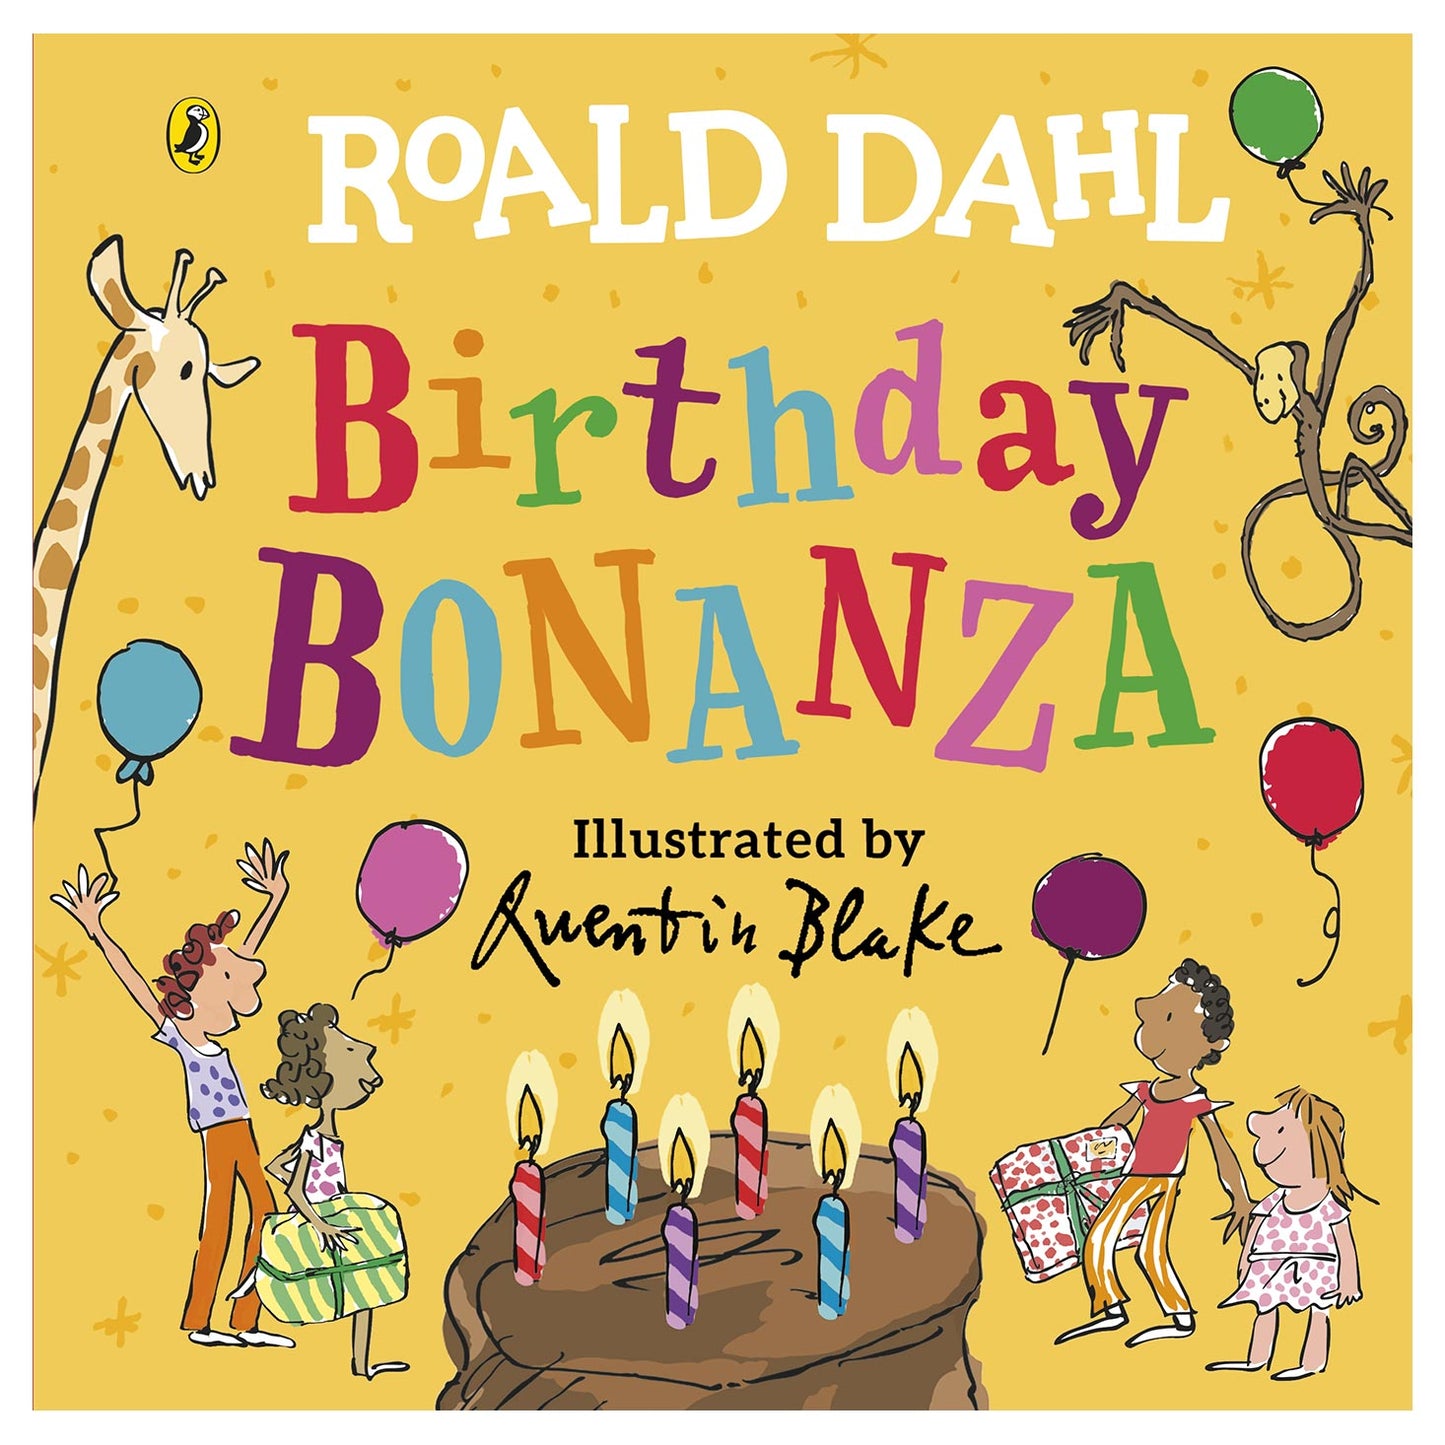 Birthday Bonanza board book based on Roald Dahl stories with Quentin Blake illustrations